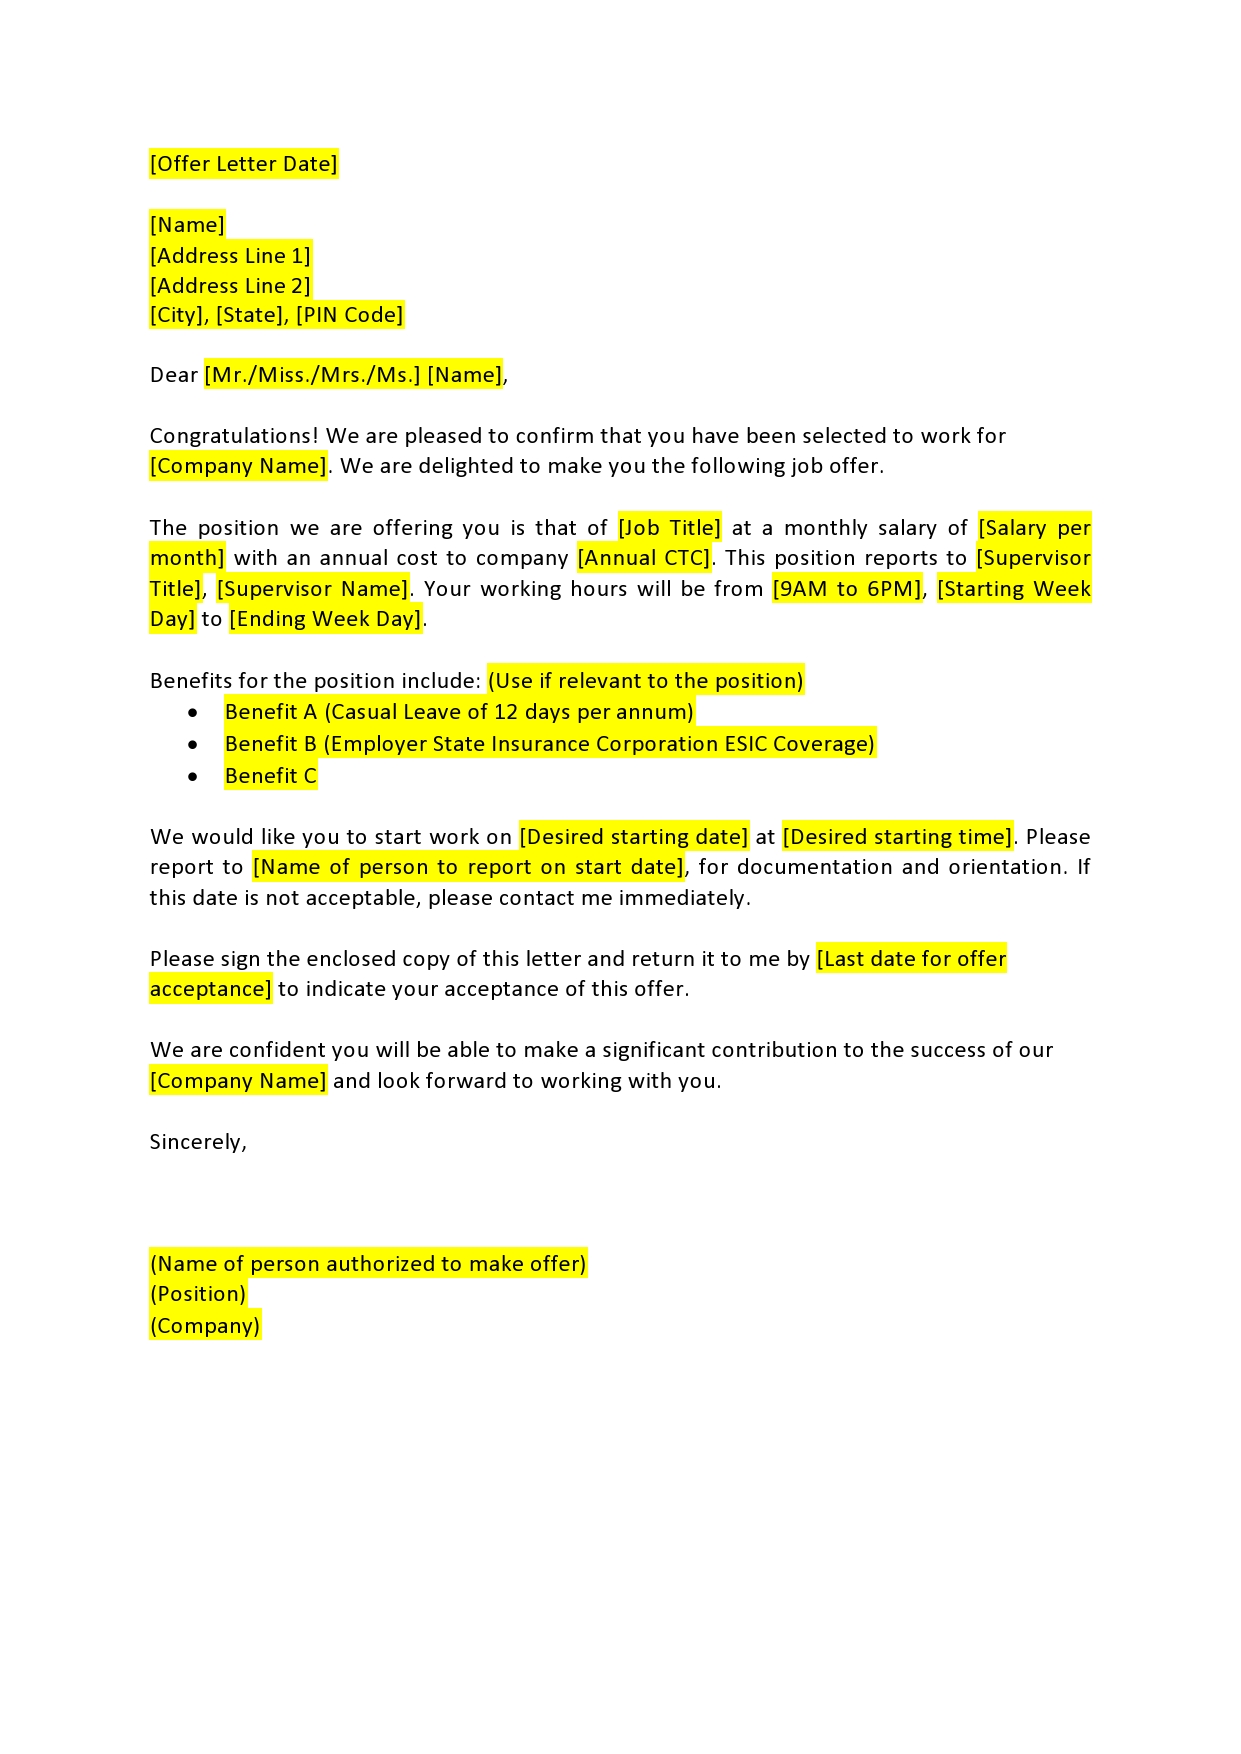 Free employment offer letter template 42